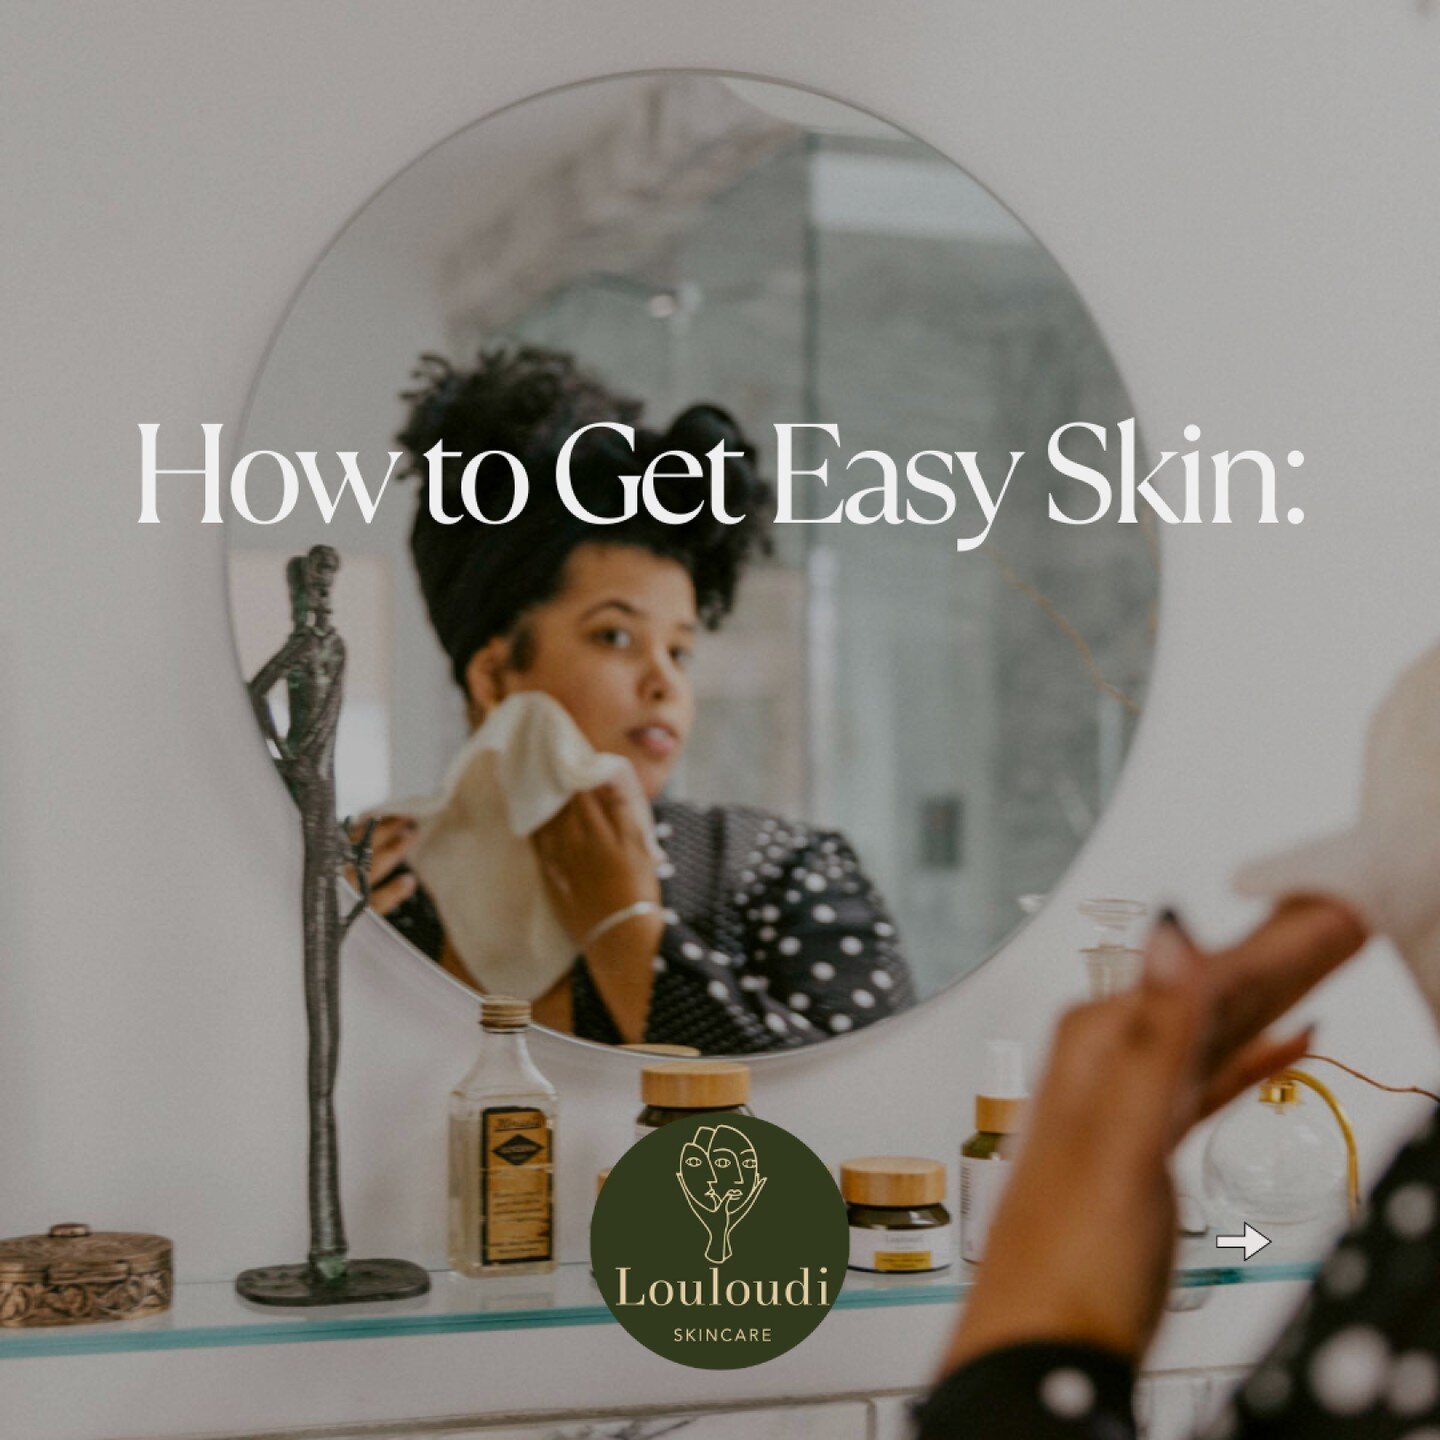 Here are 5 tips for easy skin.

Read our blog for more skincare and wellness tips and deep dives.